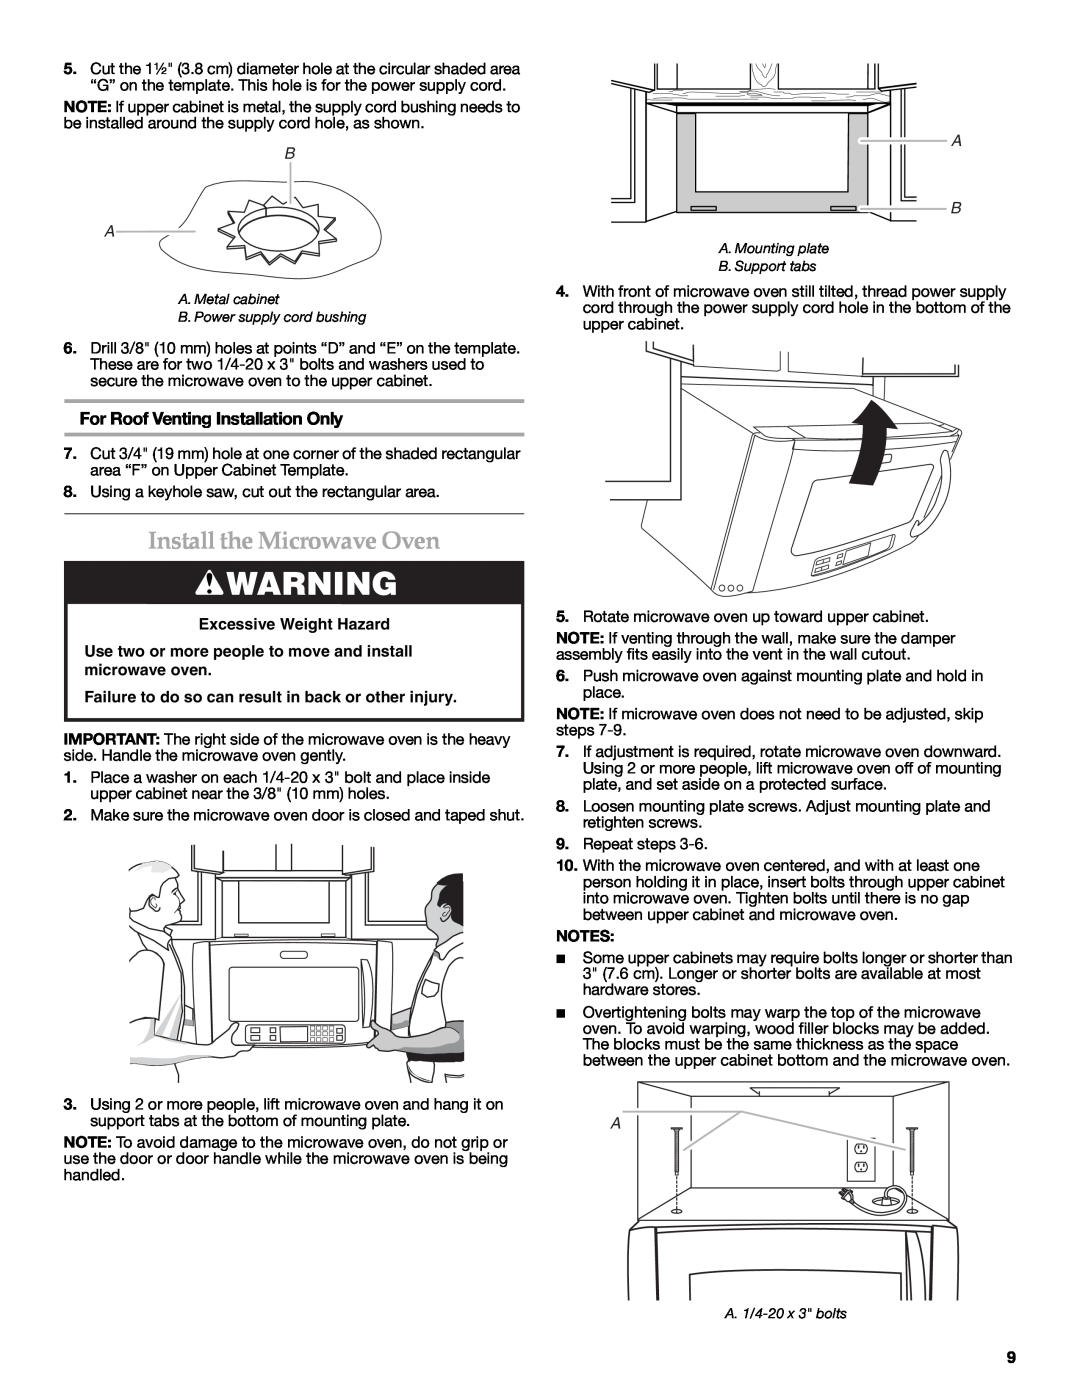 KitchenAid W10189714A, W10190011A Install the Microwave Oven, For Roof Venting Installation Only, Excessive Weight Hazard 